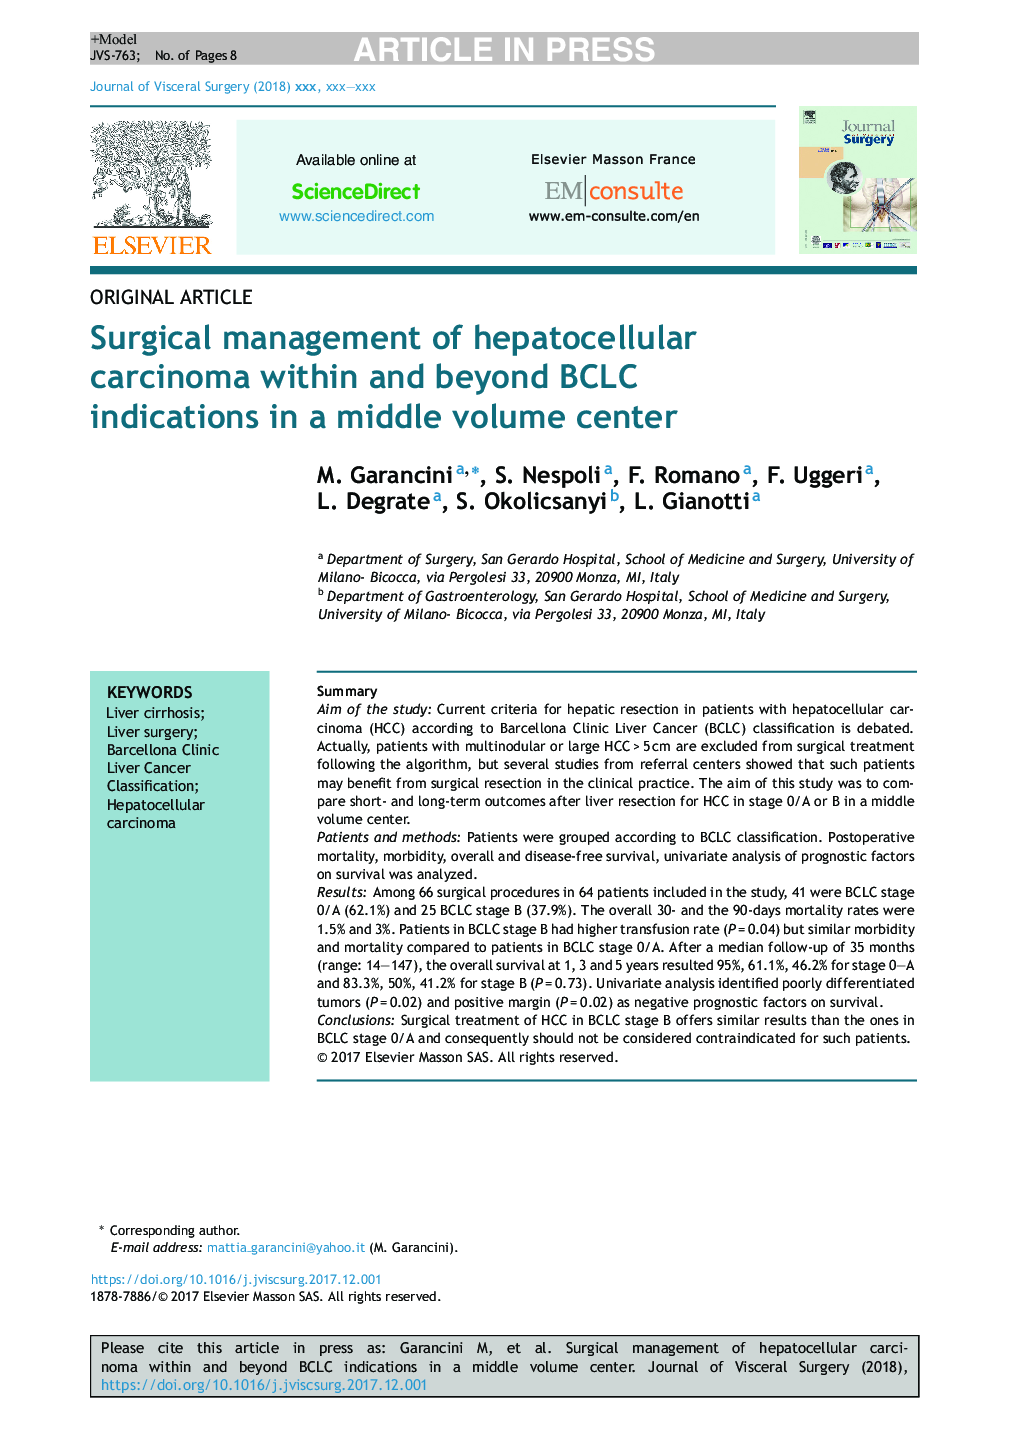 Surgical management of hepatocellular carcinoma within and beyond BCLC indications in a middle volume center